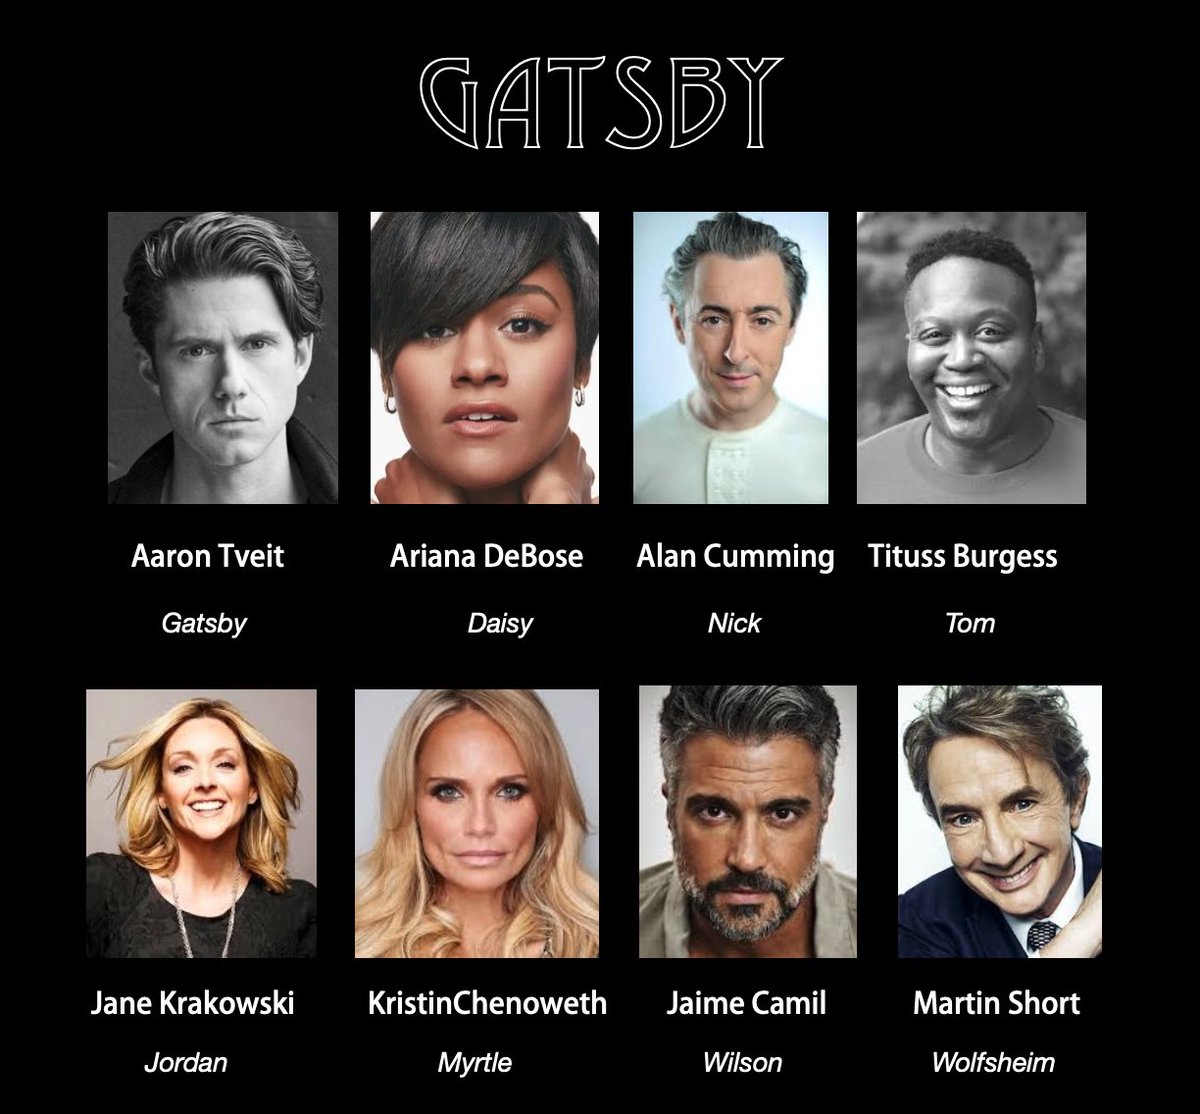 I guess now would be a good time to let you know that I also recently adapted The Great Gatsby as a musical. I think there's room for all three! Here's our cast announcement.